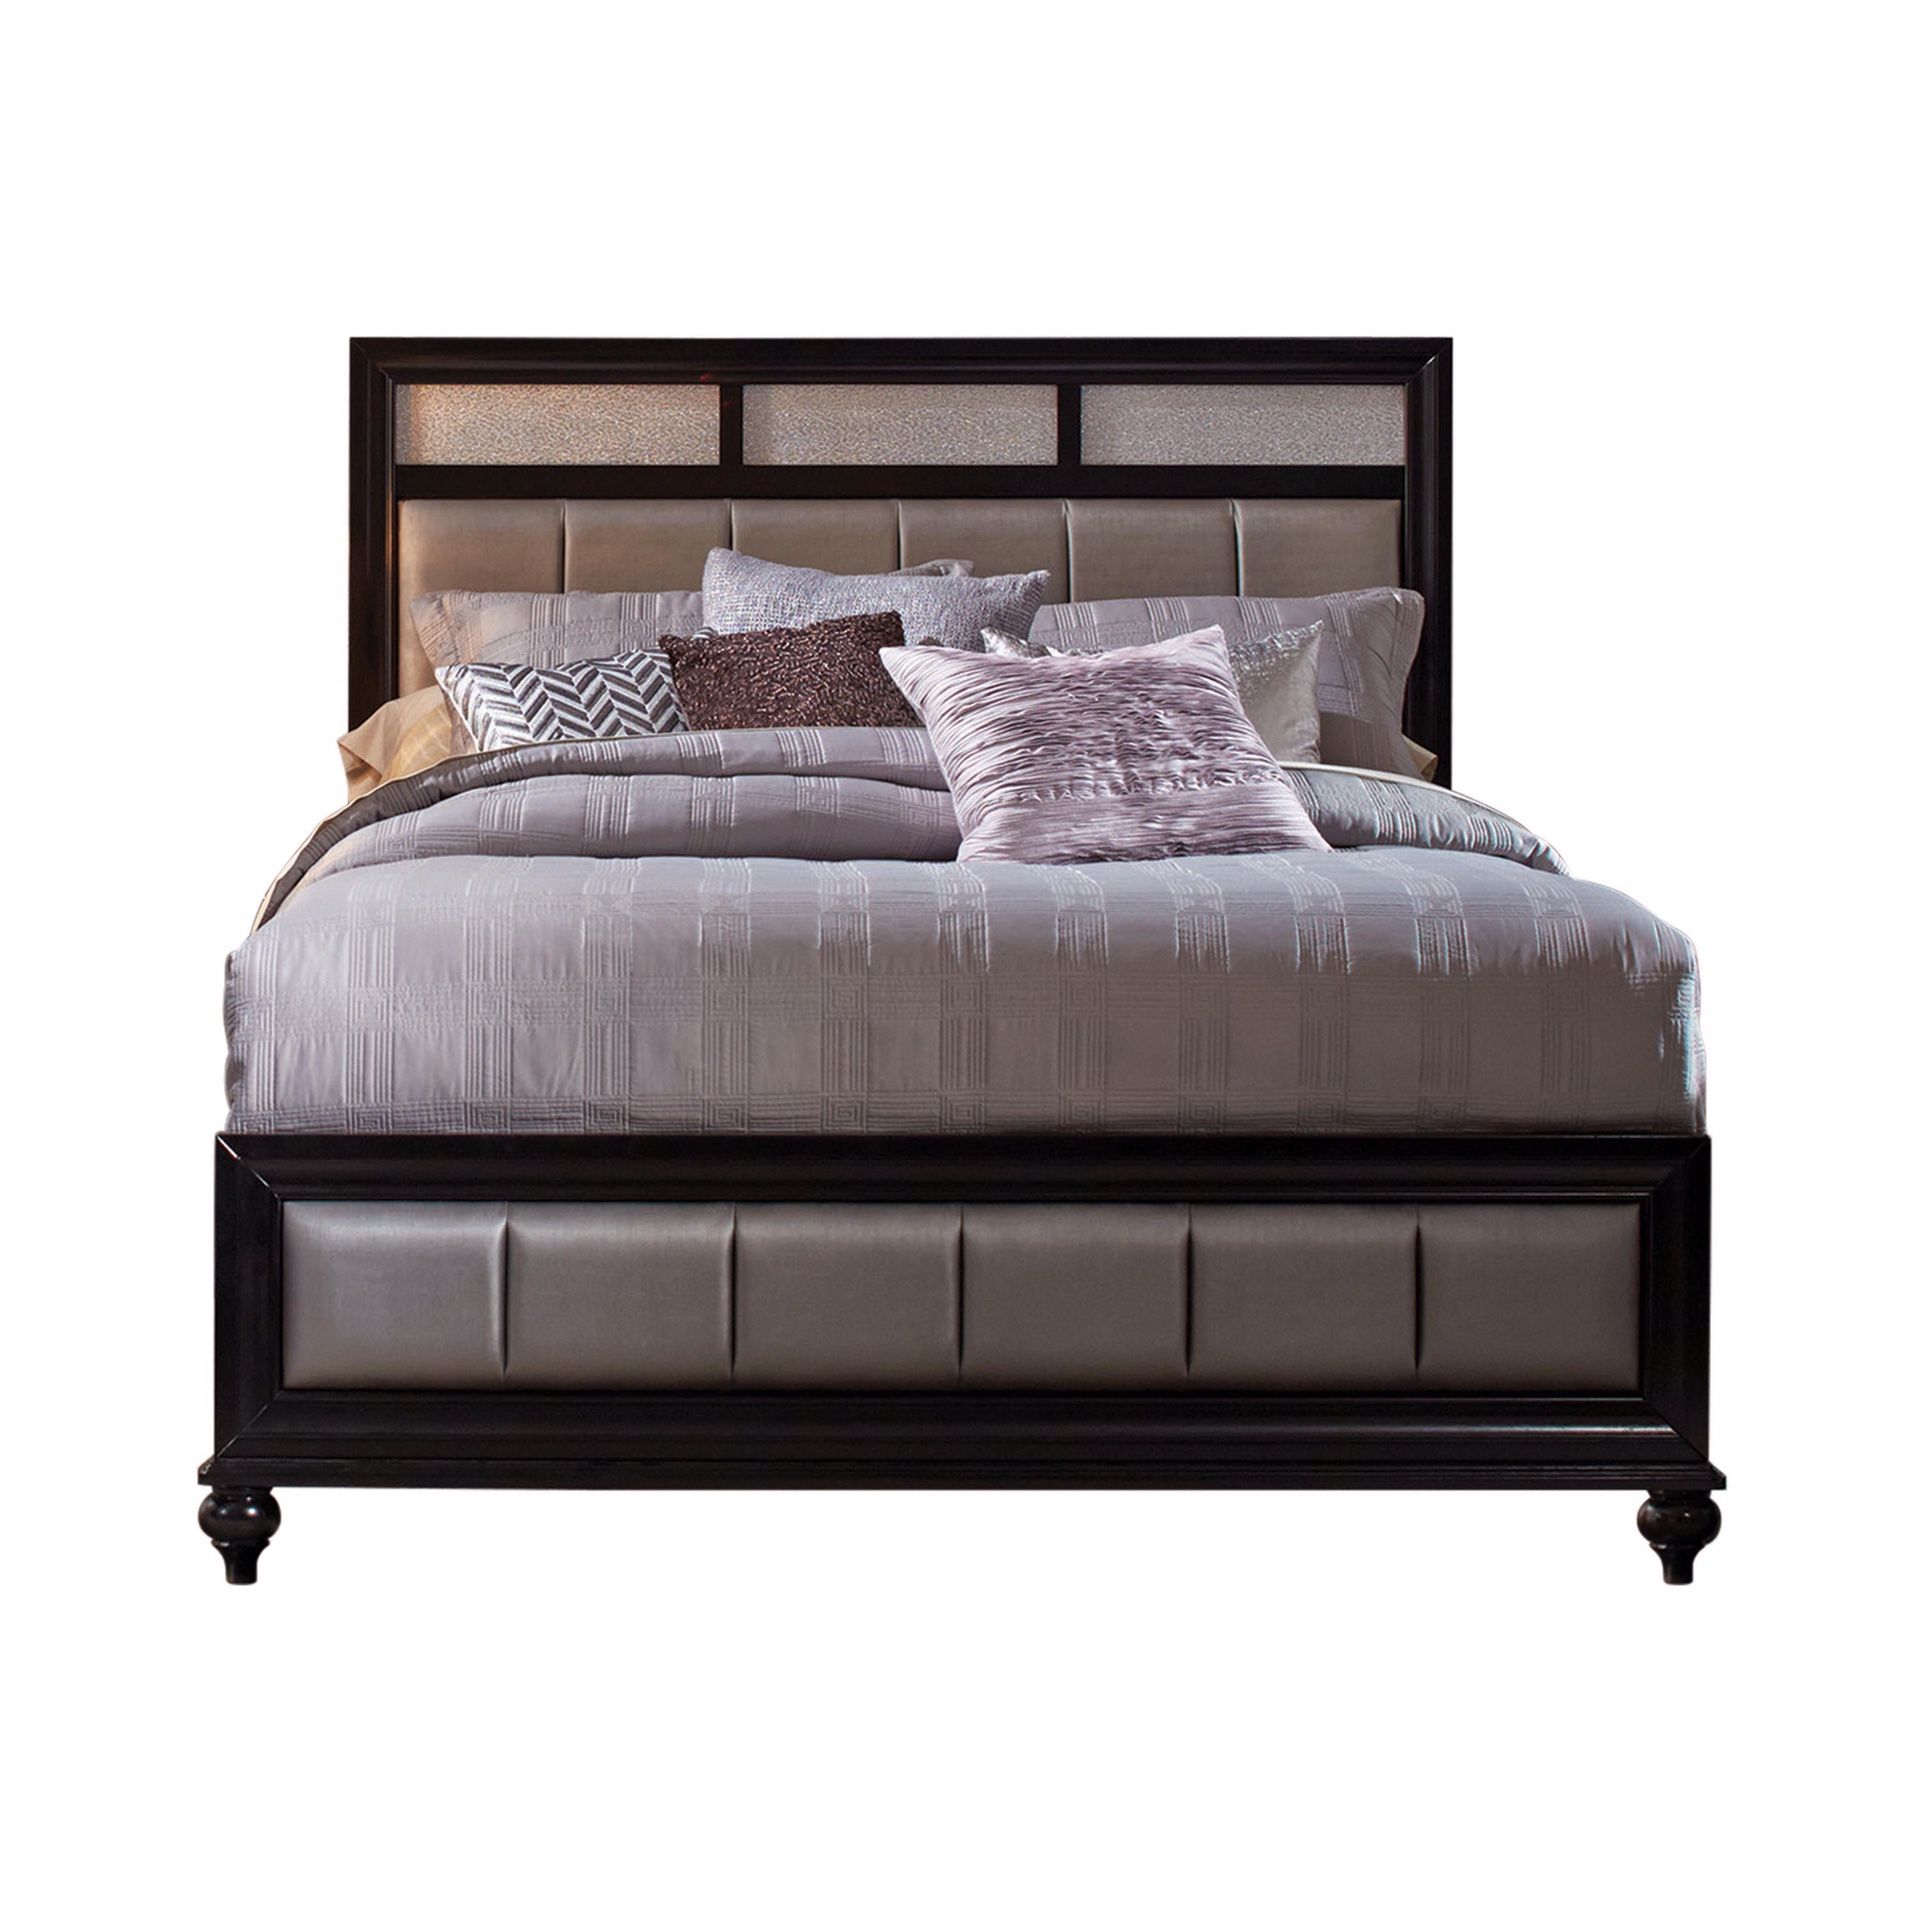 Queen Bed Frame with Mattress included ( Cama con Colchón)